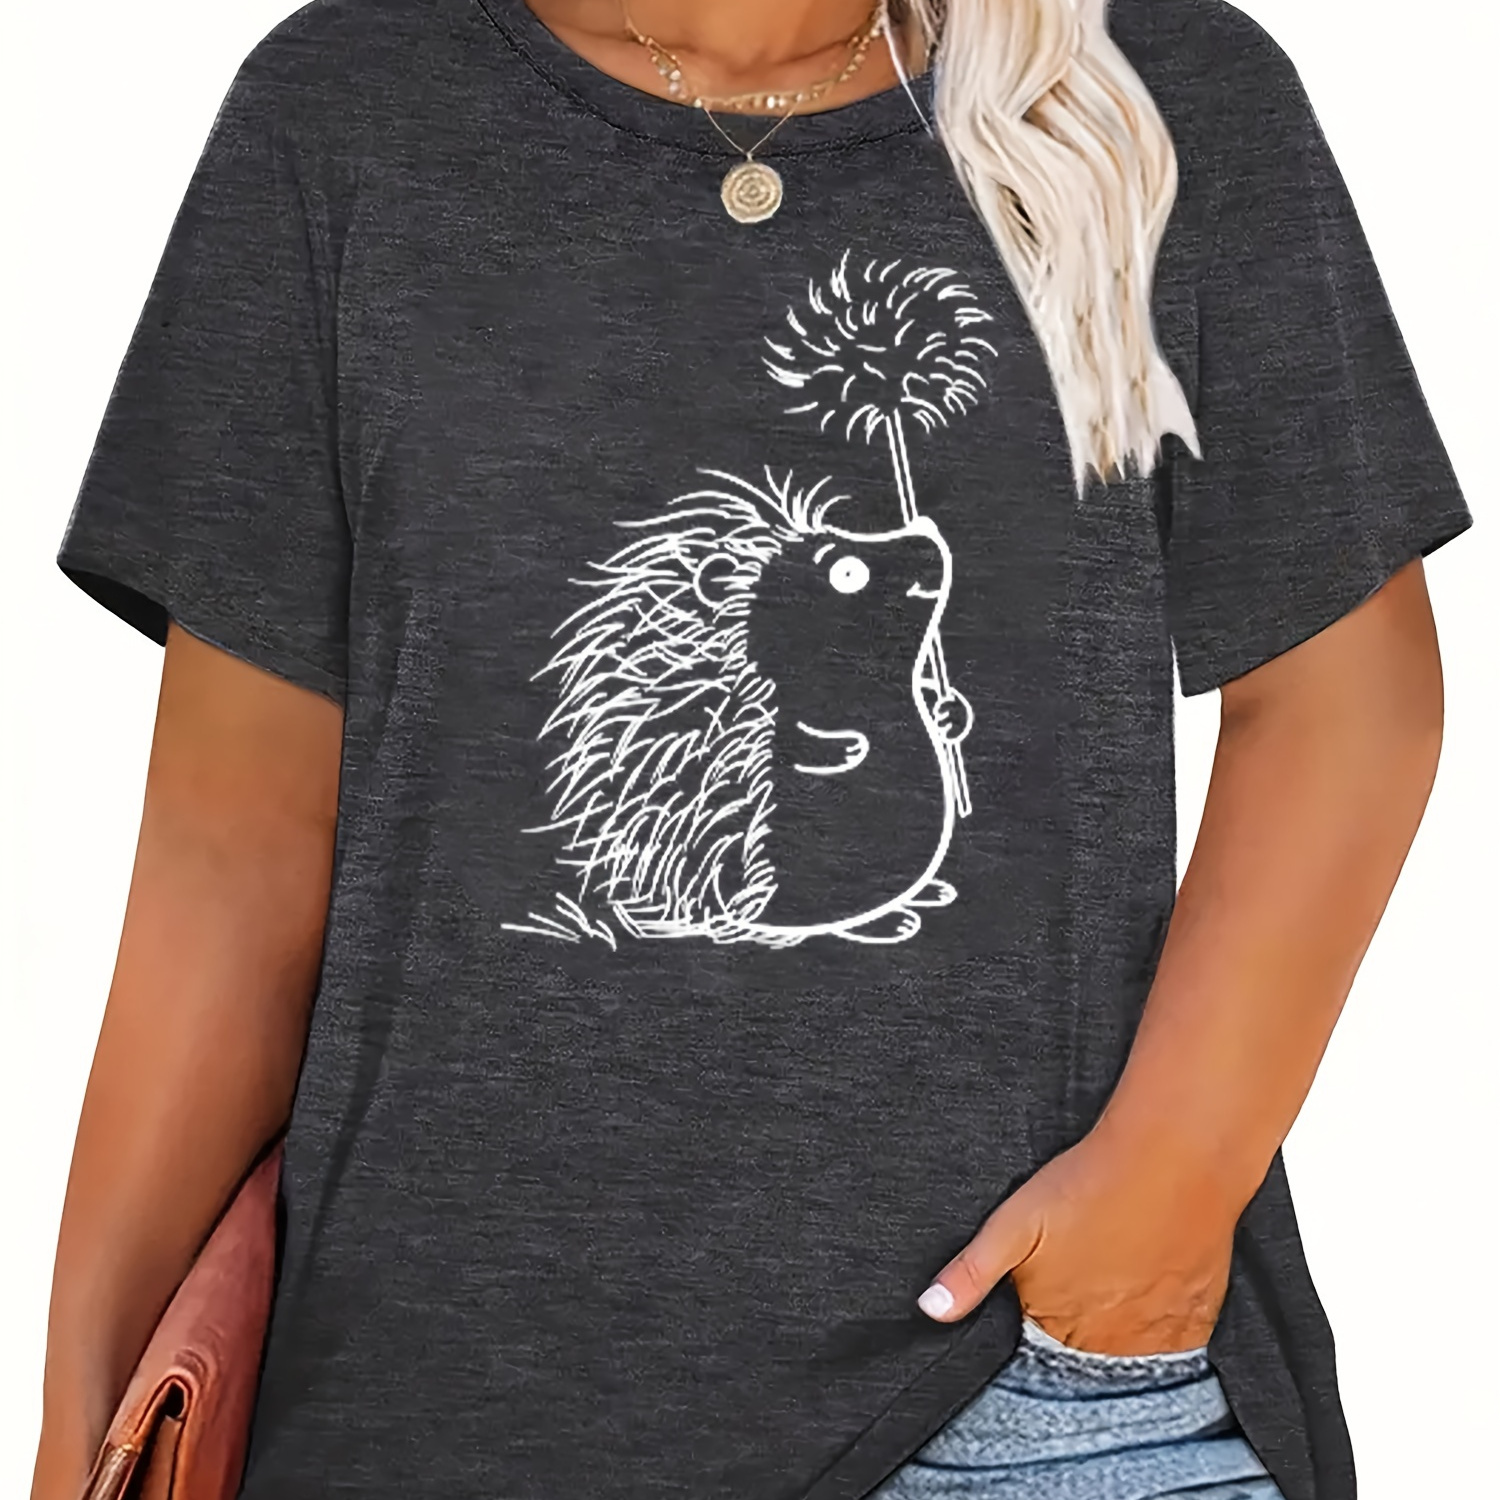 

Plus Size Hedgehog & Dandelion Print T-shirt, Casual Short Sleeve Top For Spring & Summer, Women's Plus Size Clothing